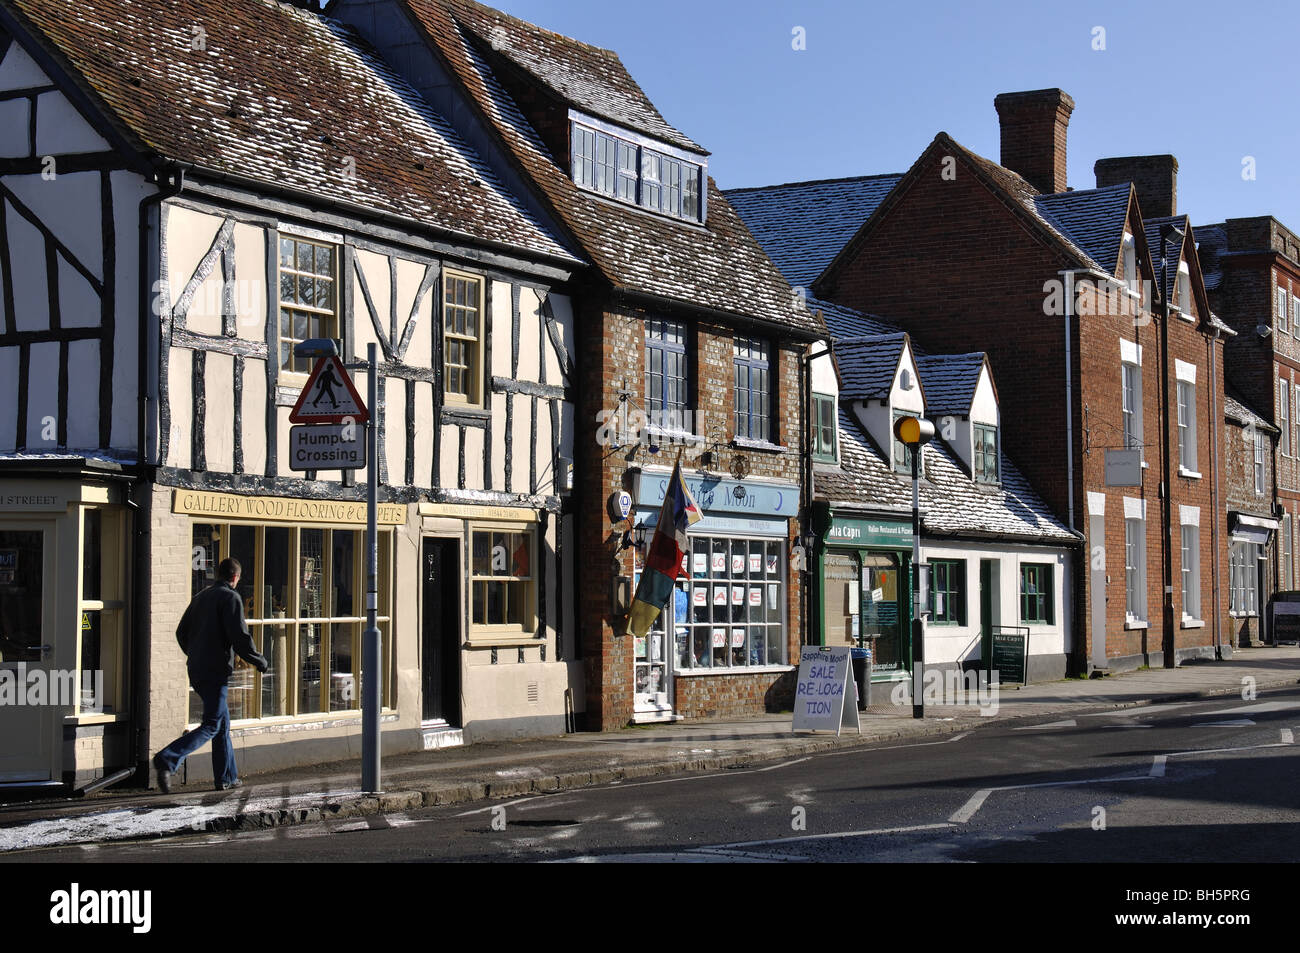 High Street in Winter, Thame, Oxfordshire, England, UK Stockfoto